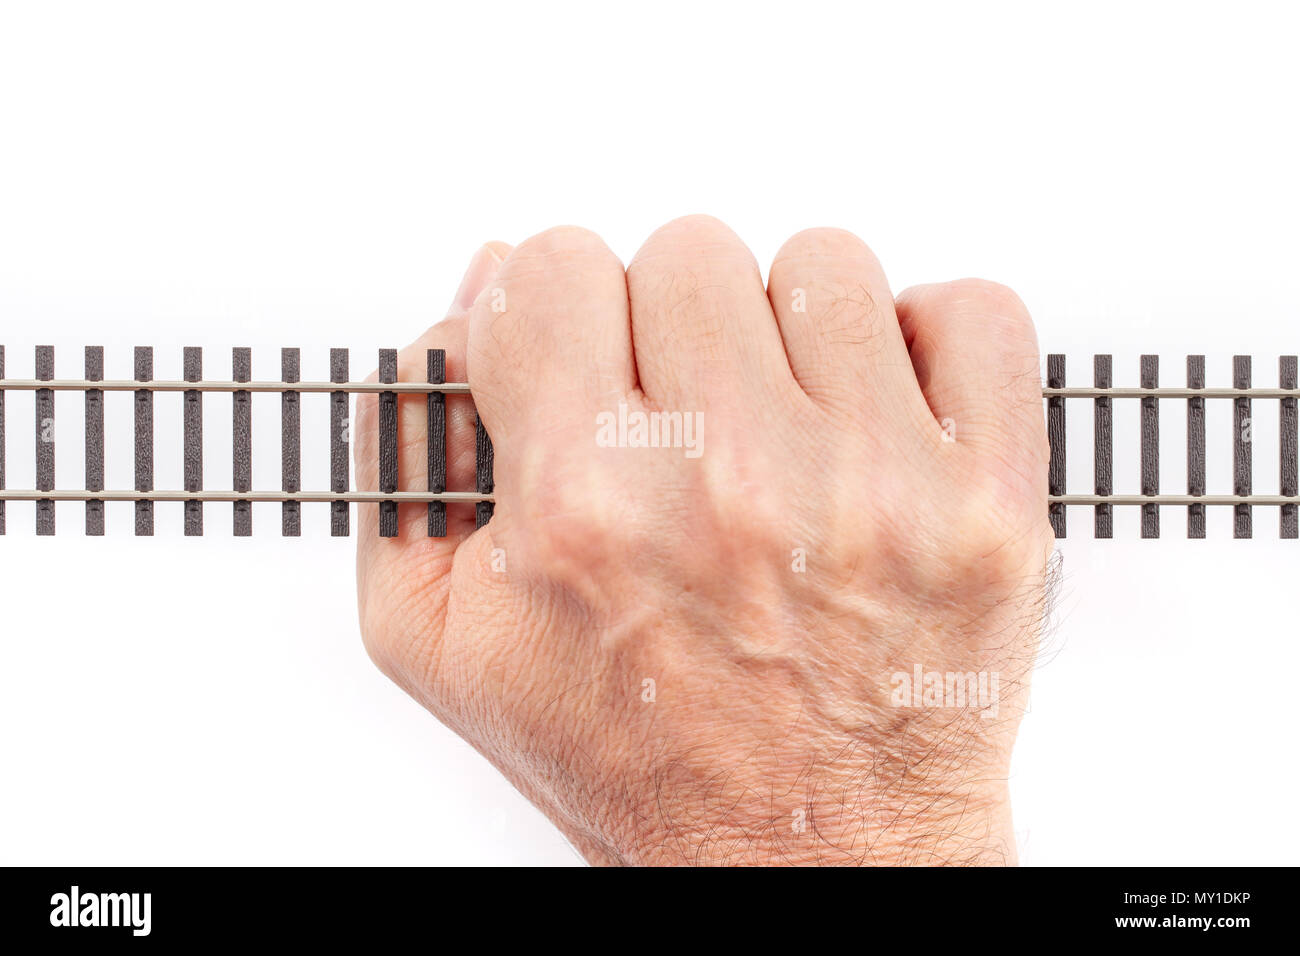 Single rail toy catched up in a human hand isolated on white. Conceptual image. Stock Photo